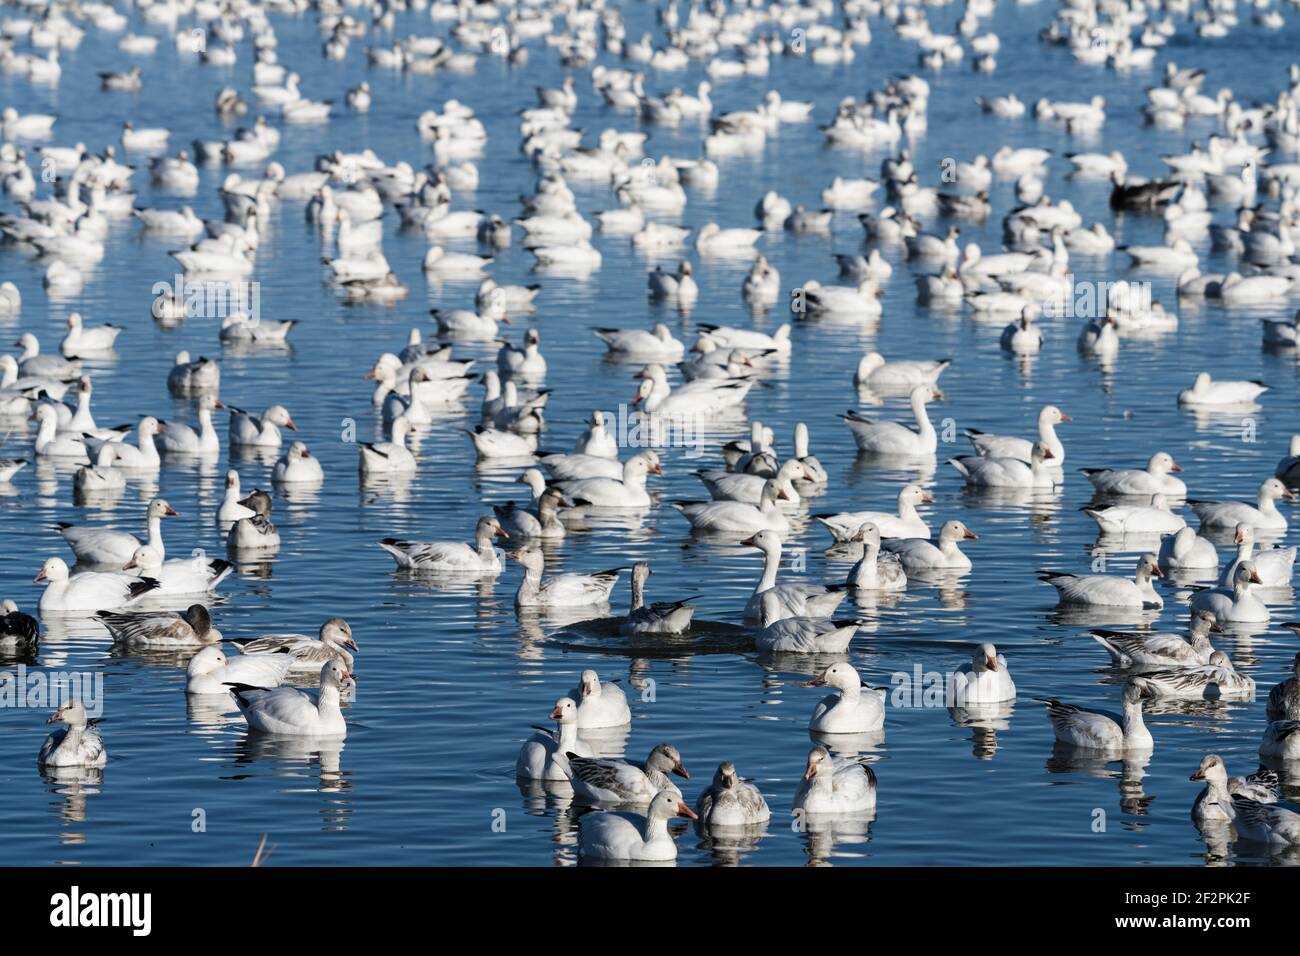 A mixed flock of Snow Geese and Ross's Geese on a pond in the Bosque del Apache National Wildlife Refuge, New Mexico. Stock Photo